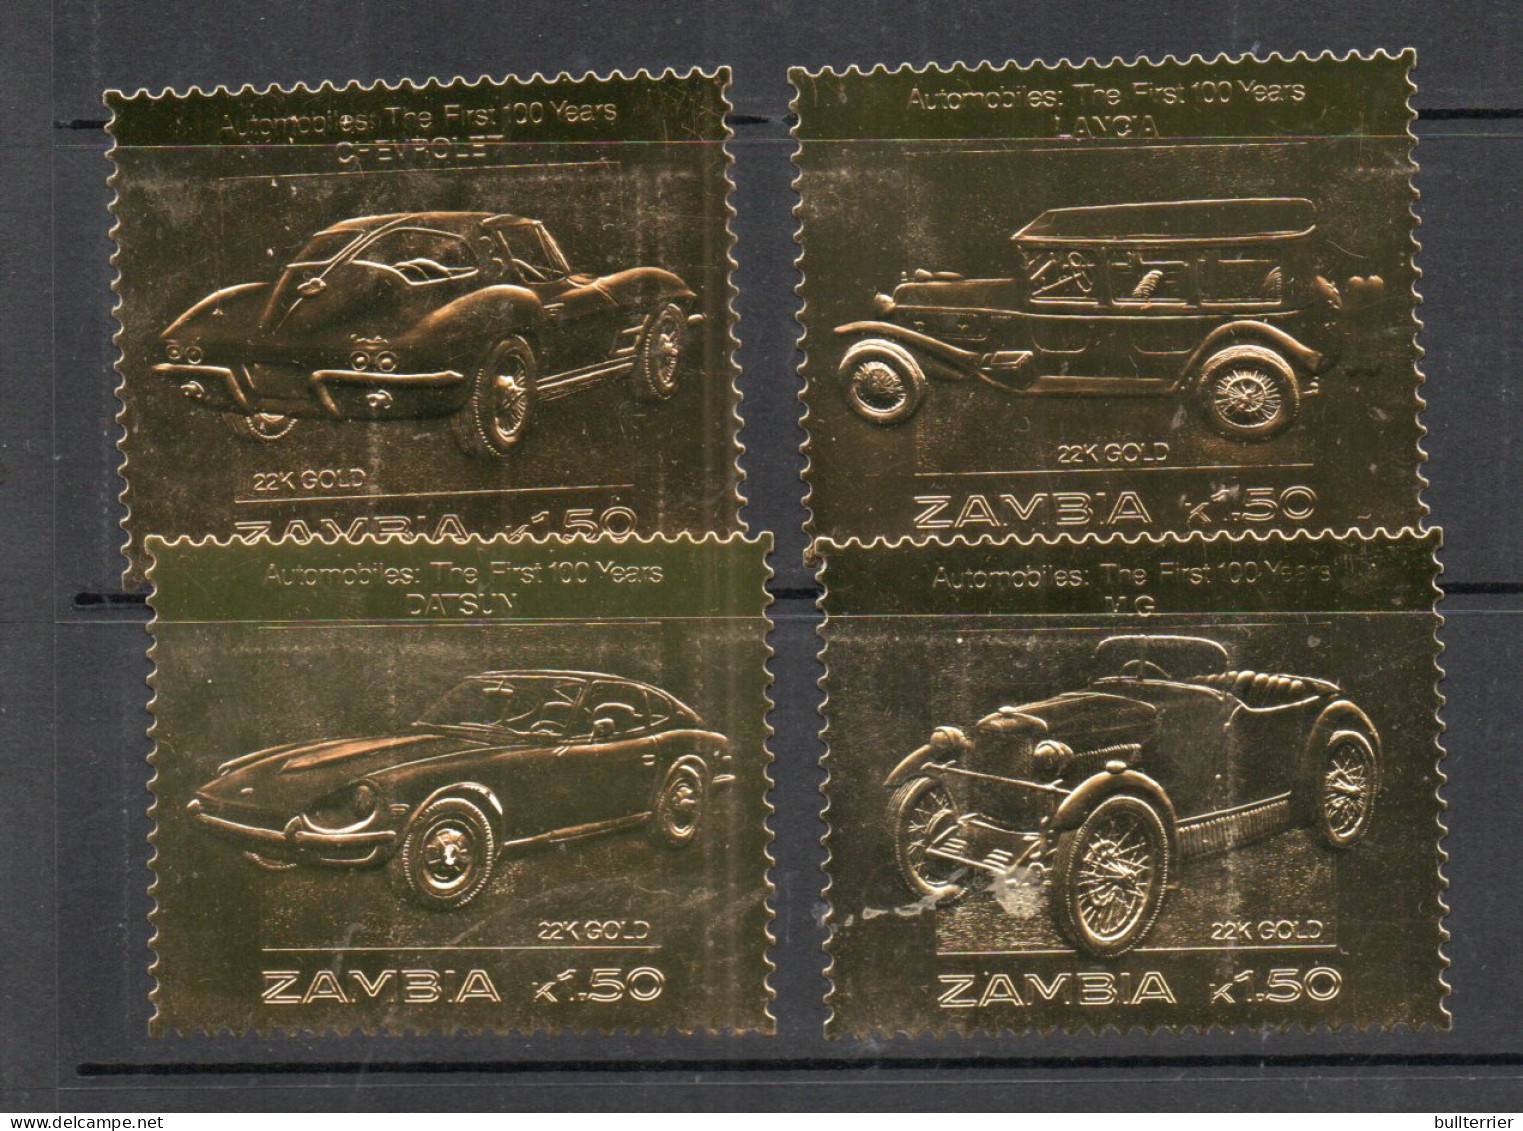 ZAMBIA - 1987 - CLASSIC CARS SET OF 4 GOLD  FOIL EMBOSSED  MINT NEVER HINGED  - Pigeons & Columbiformes